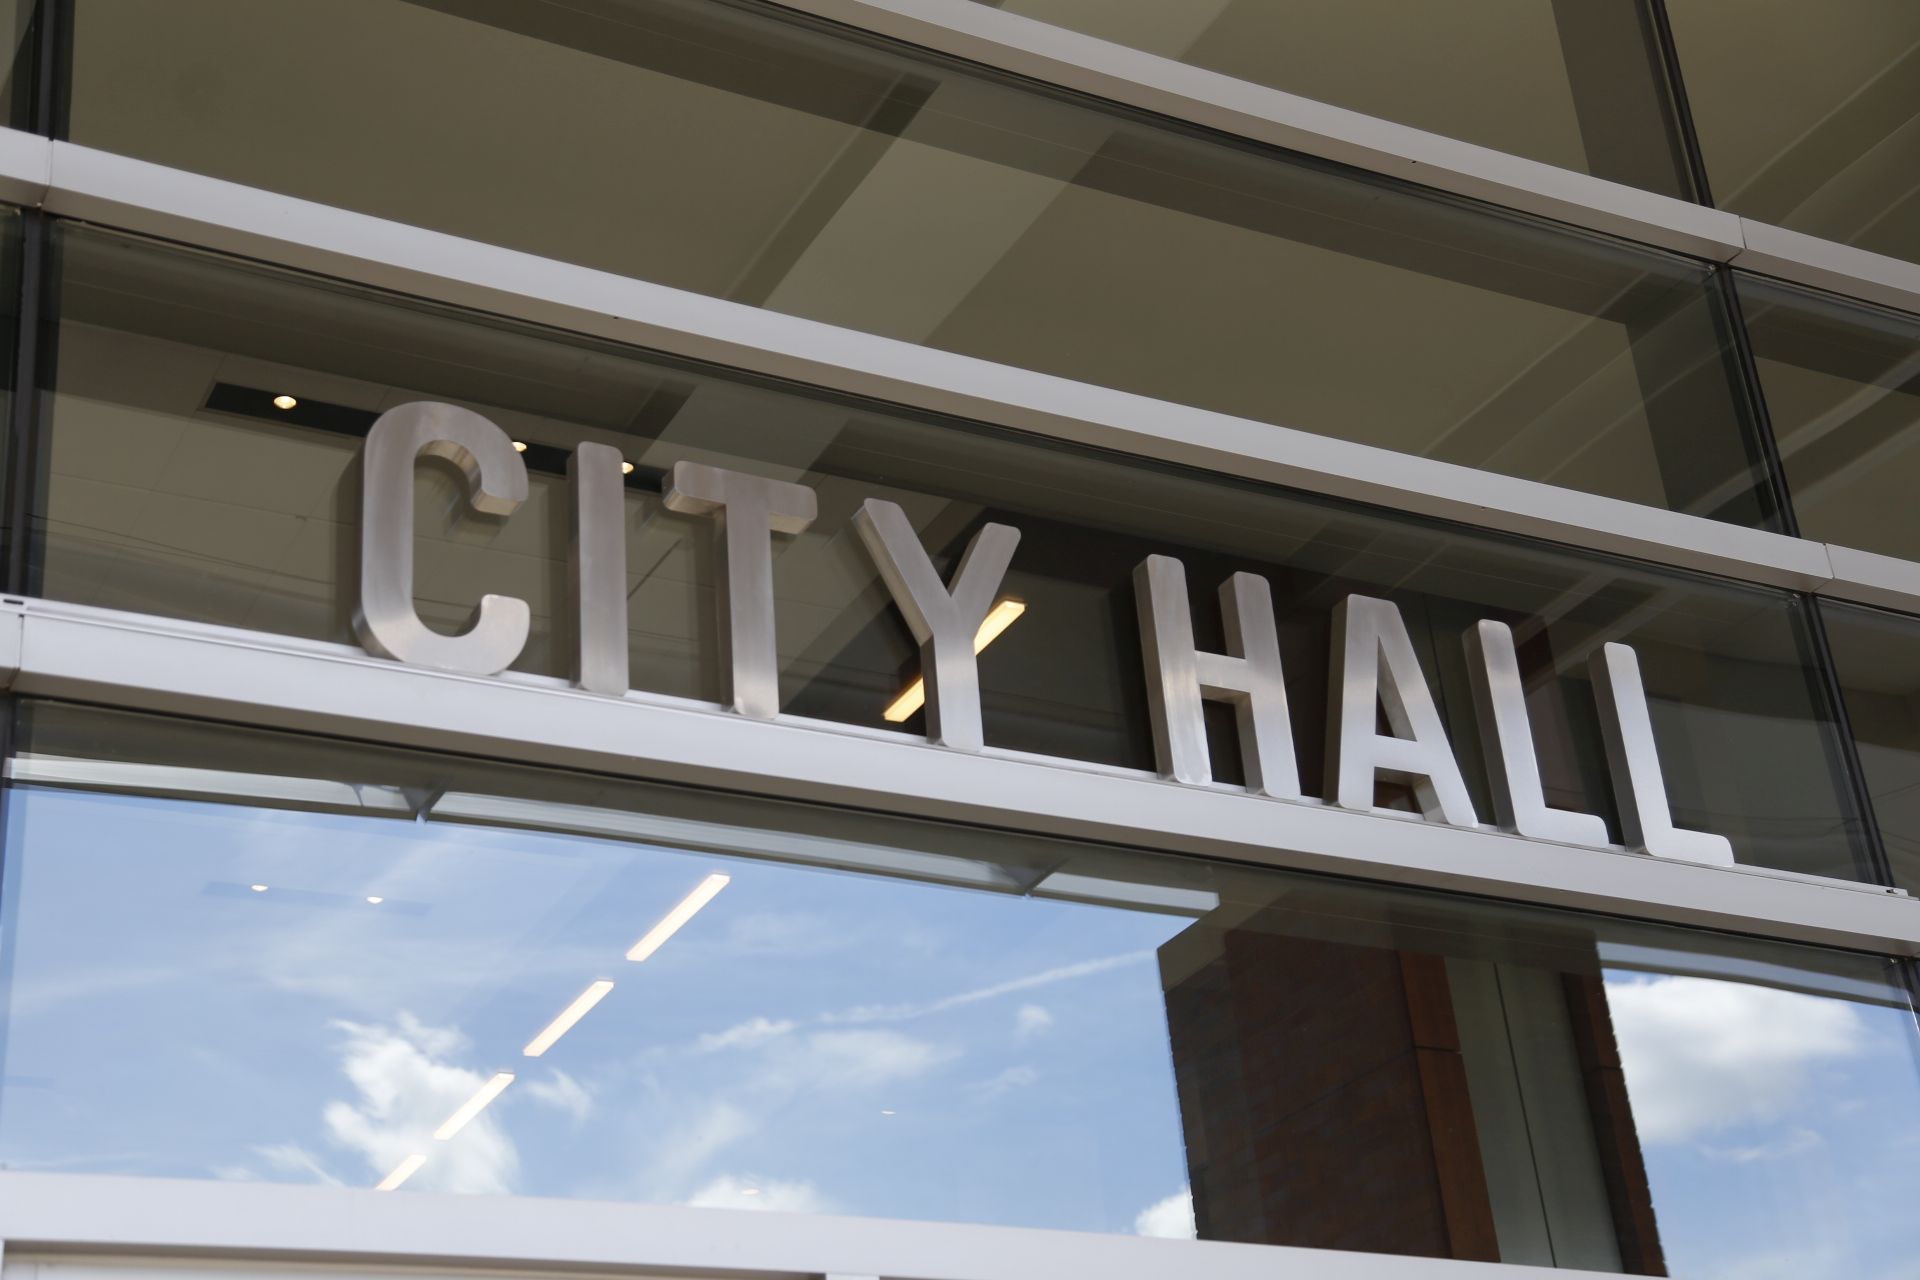 Image of City Hall sign